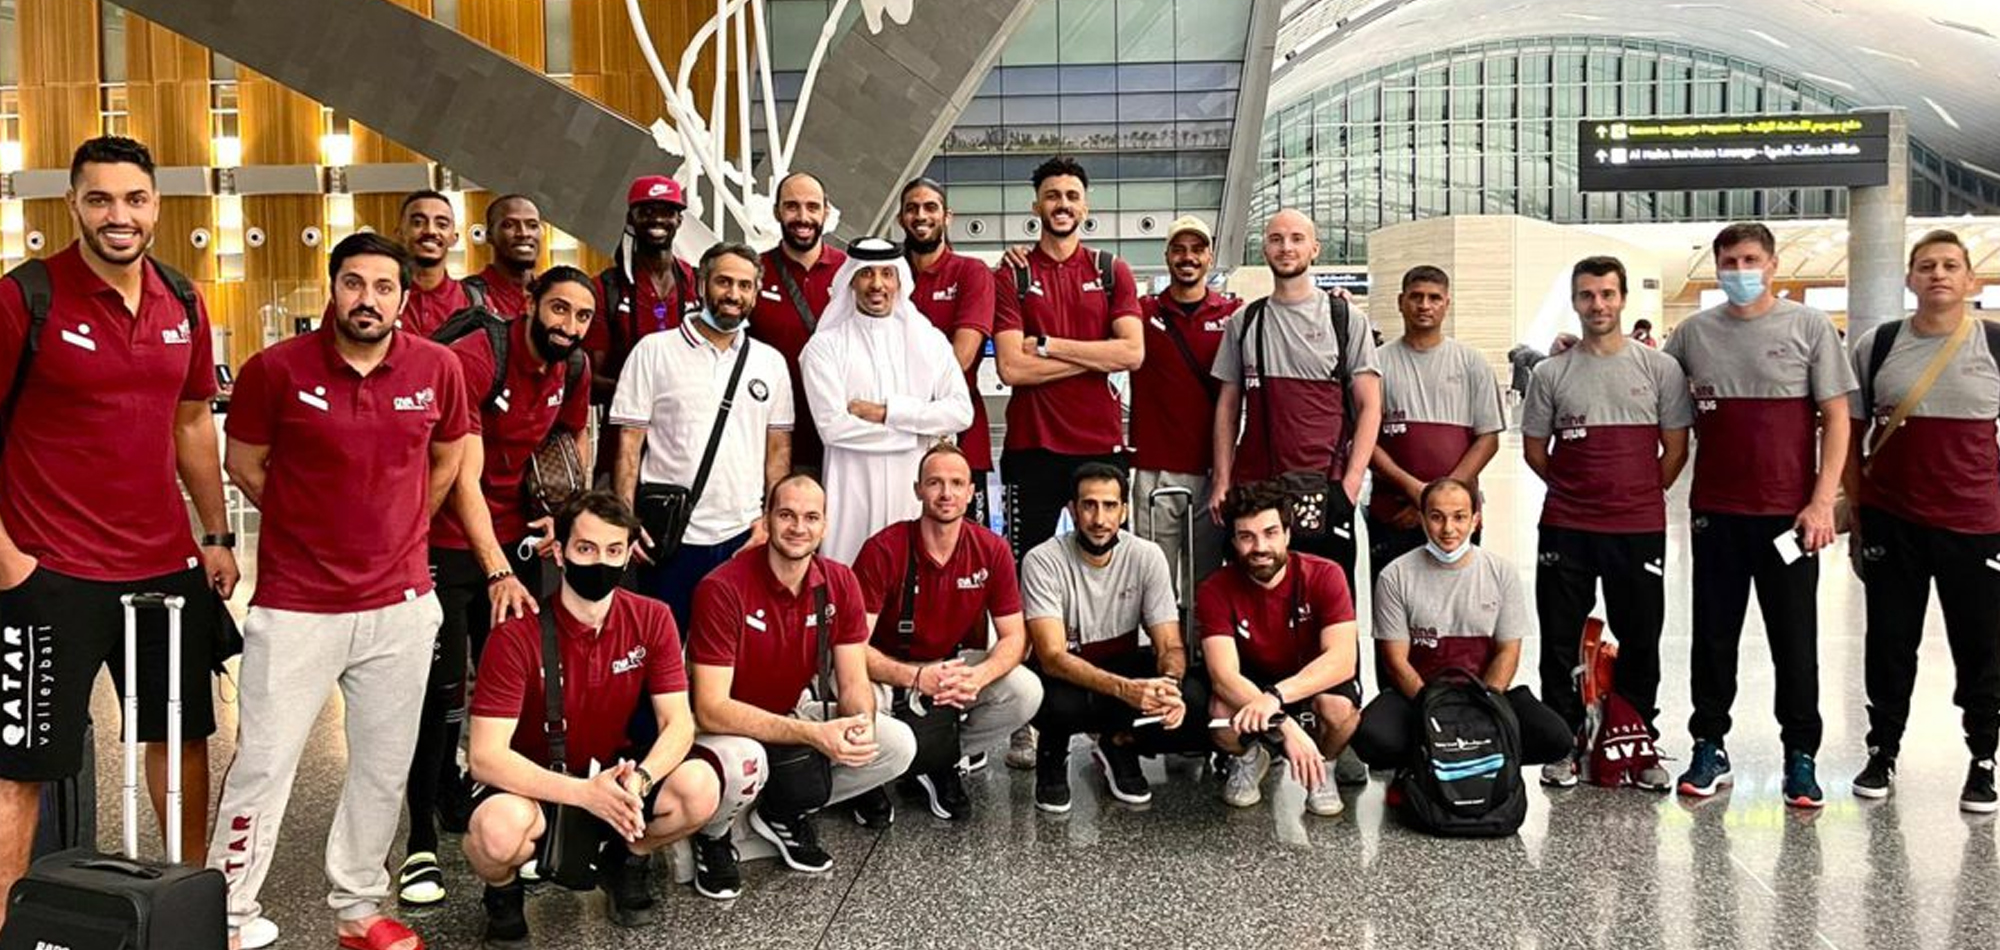 QATAR SELECTED TO COMPETE IN 2022 MEN’S VOLLEYBALL CHALLENGE CUP IN KOREA